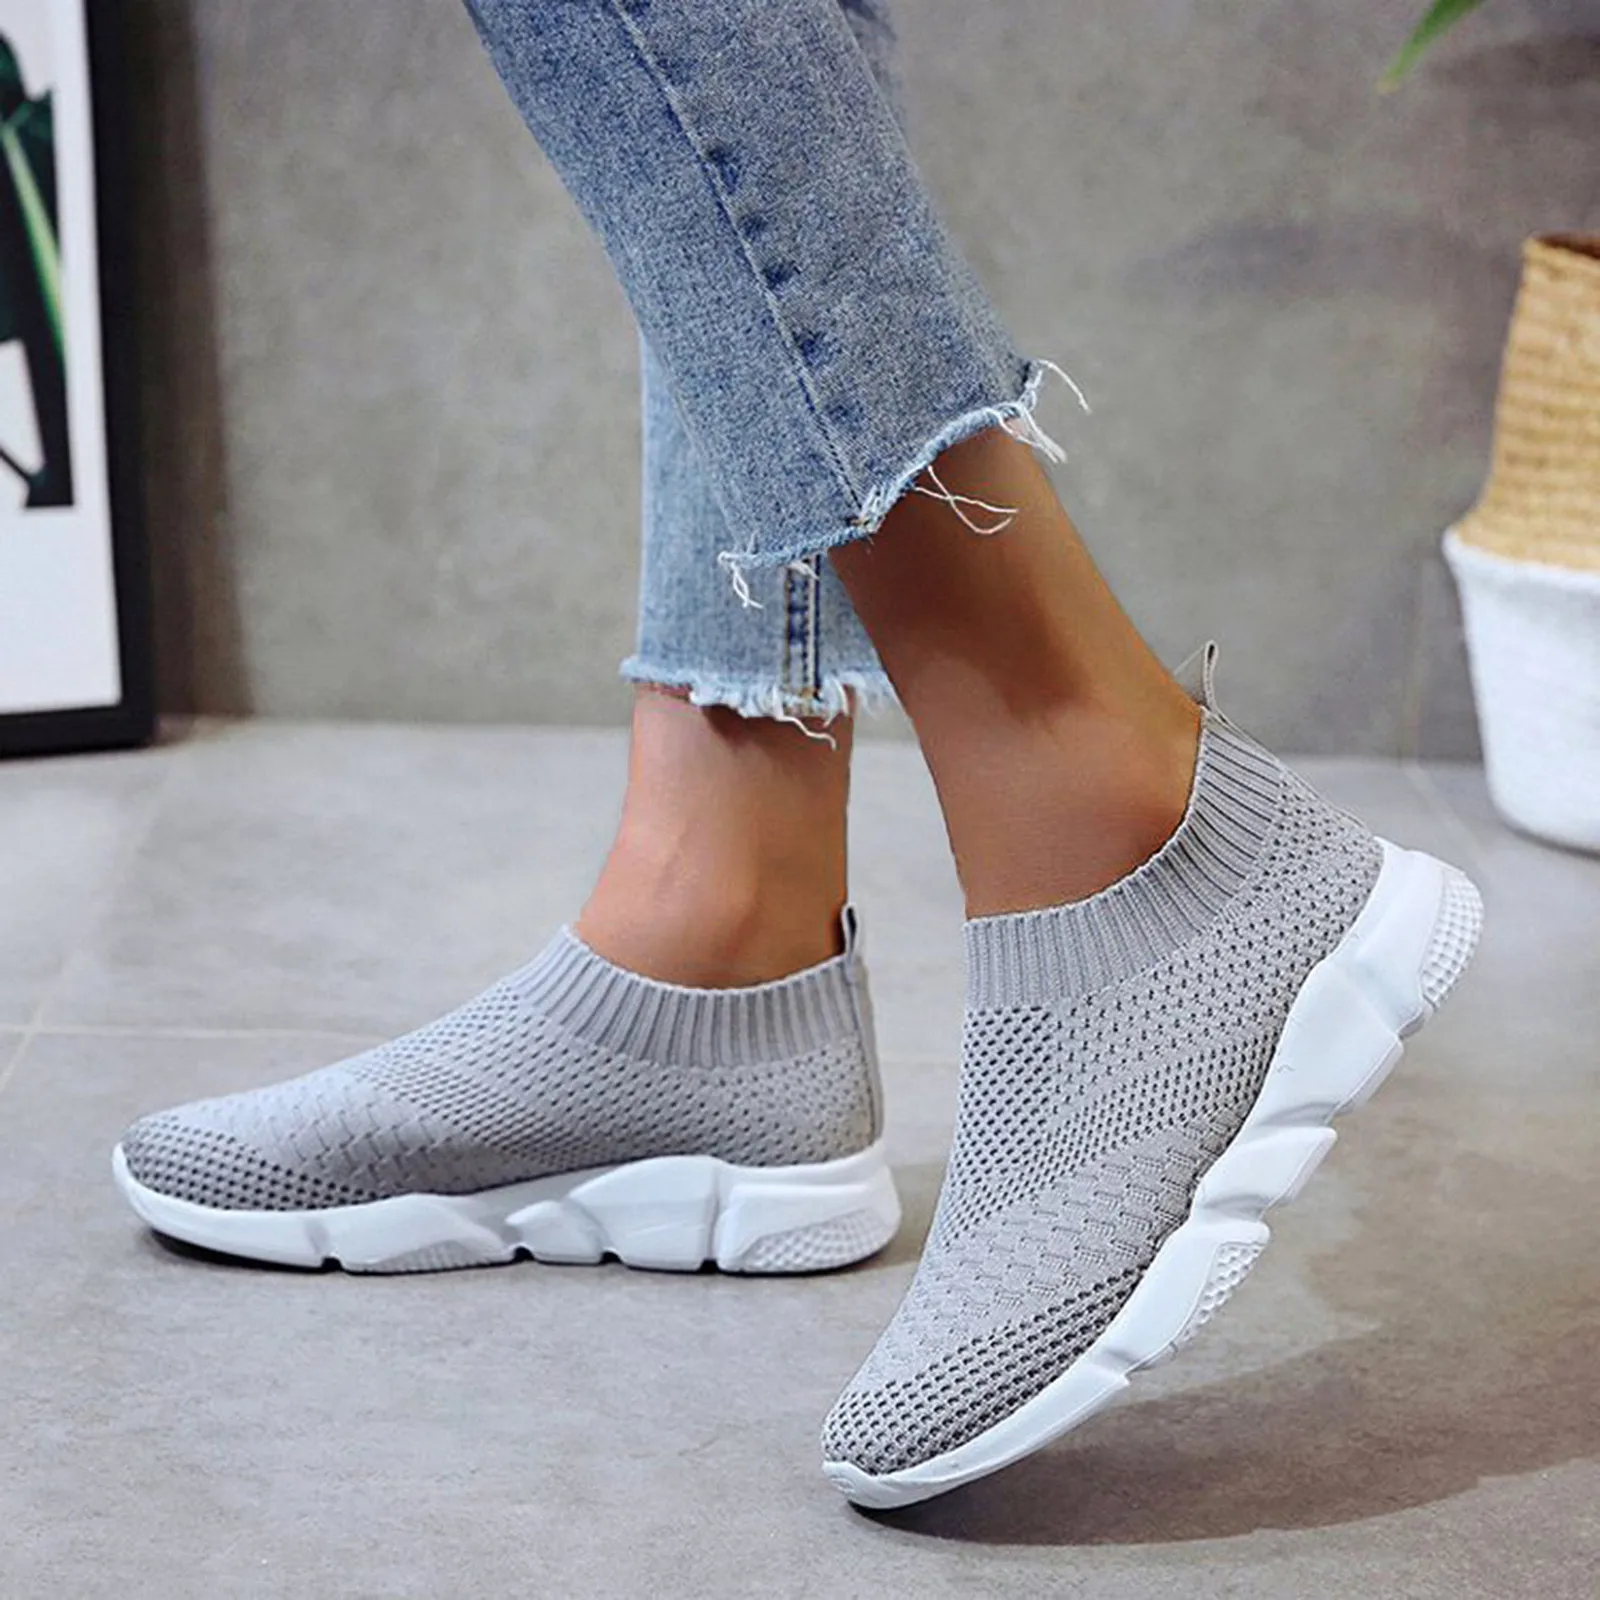 

Women Flats Shoes Breathable Knitted Sock Mesh Platform Sneakers Women Slip On Soft Casual Vulcanized Shoes Zapatillas Mujer